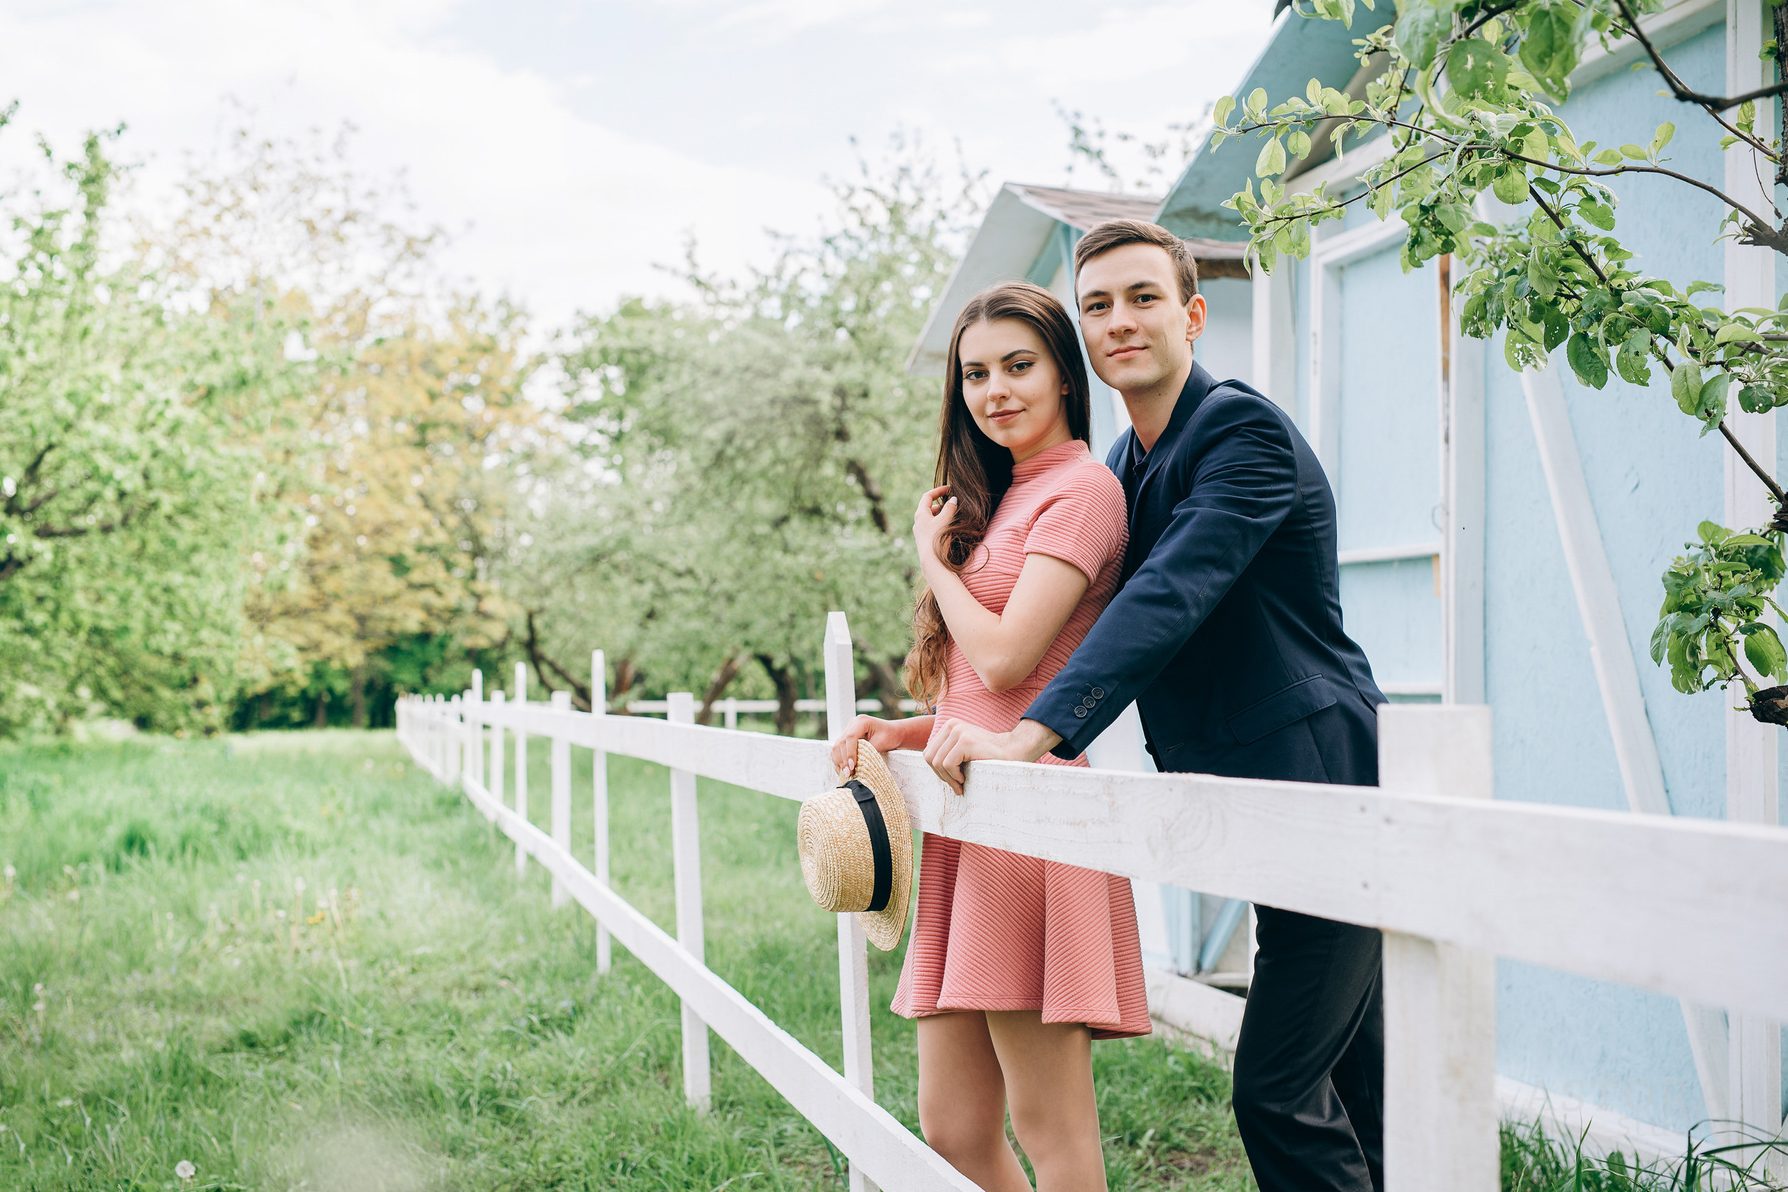 Sergii And Tanya: We hired wonderful photographers for proposal!